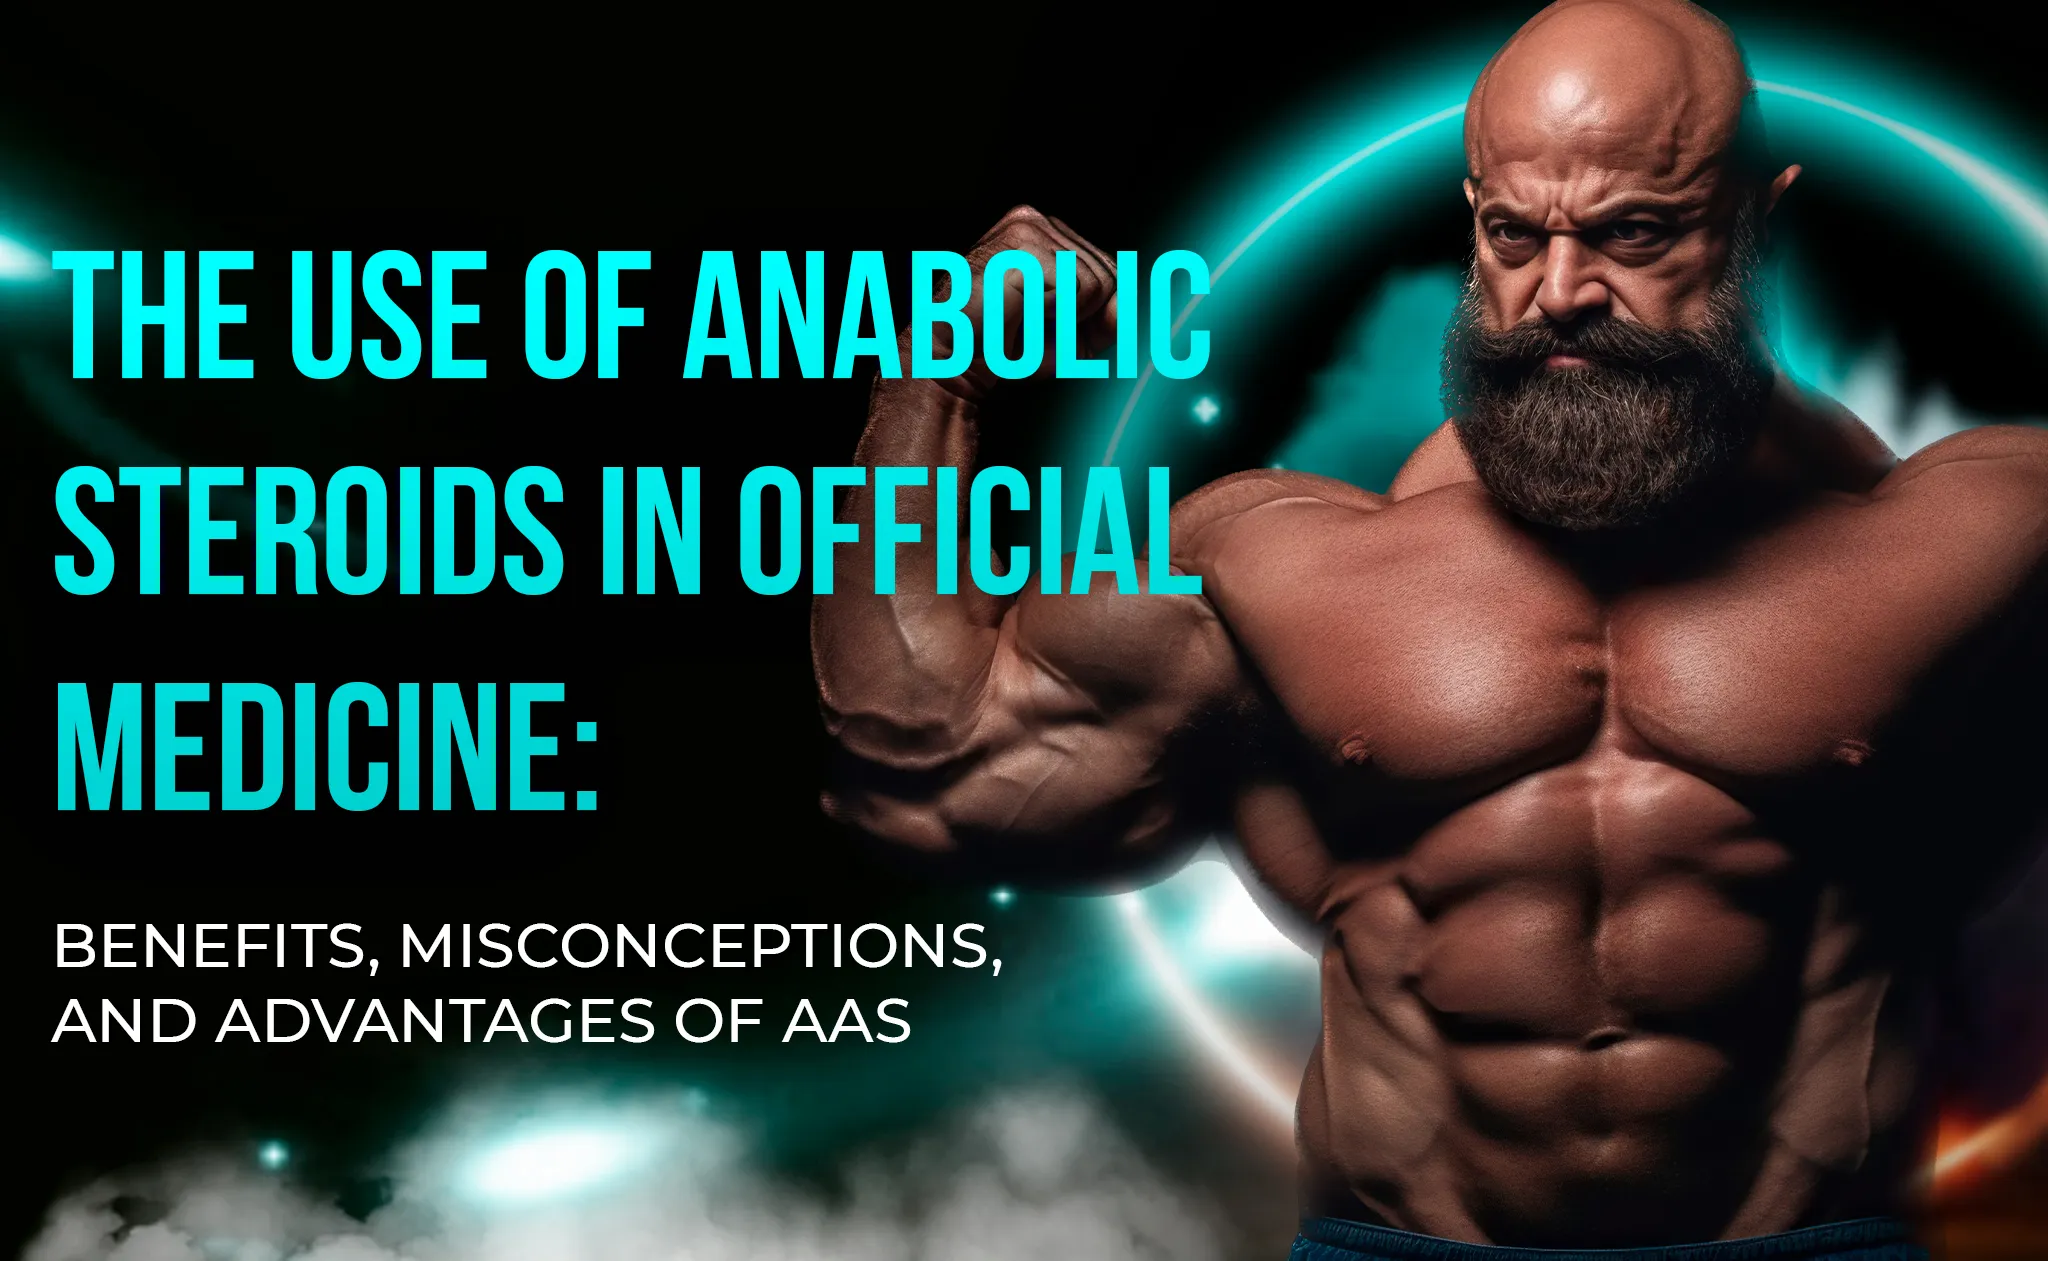 The Use of Anabolic Steroids in Official Medicine